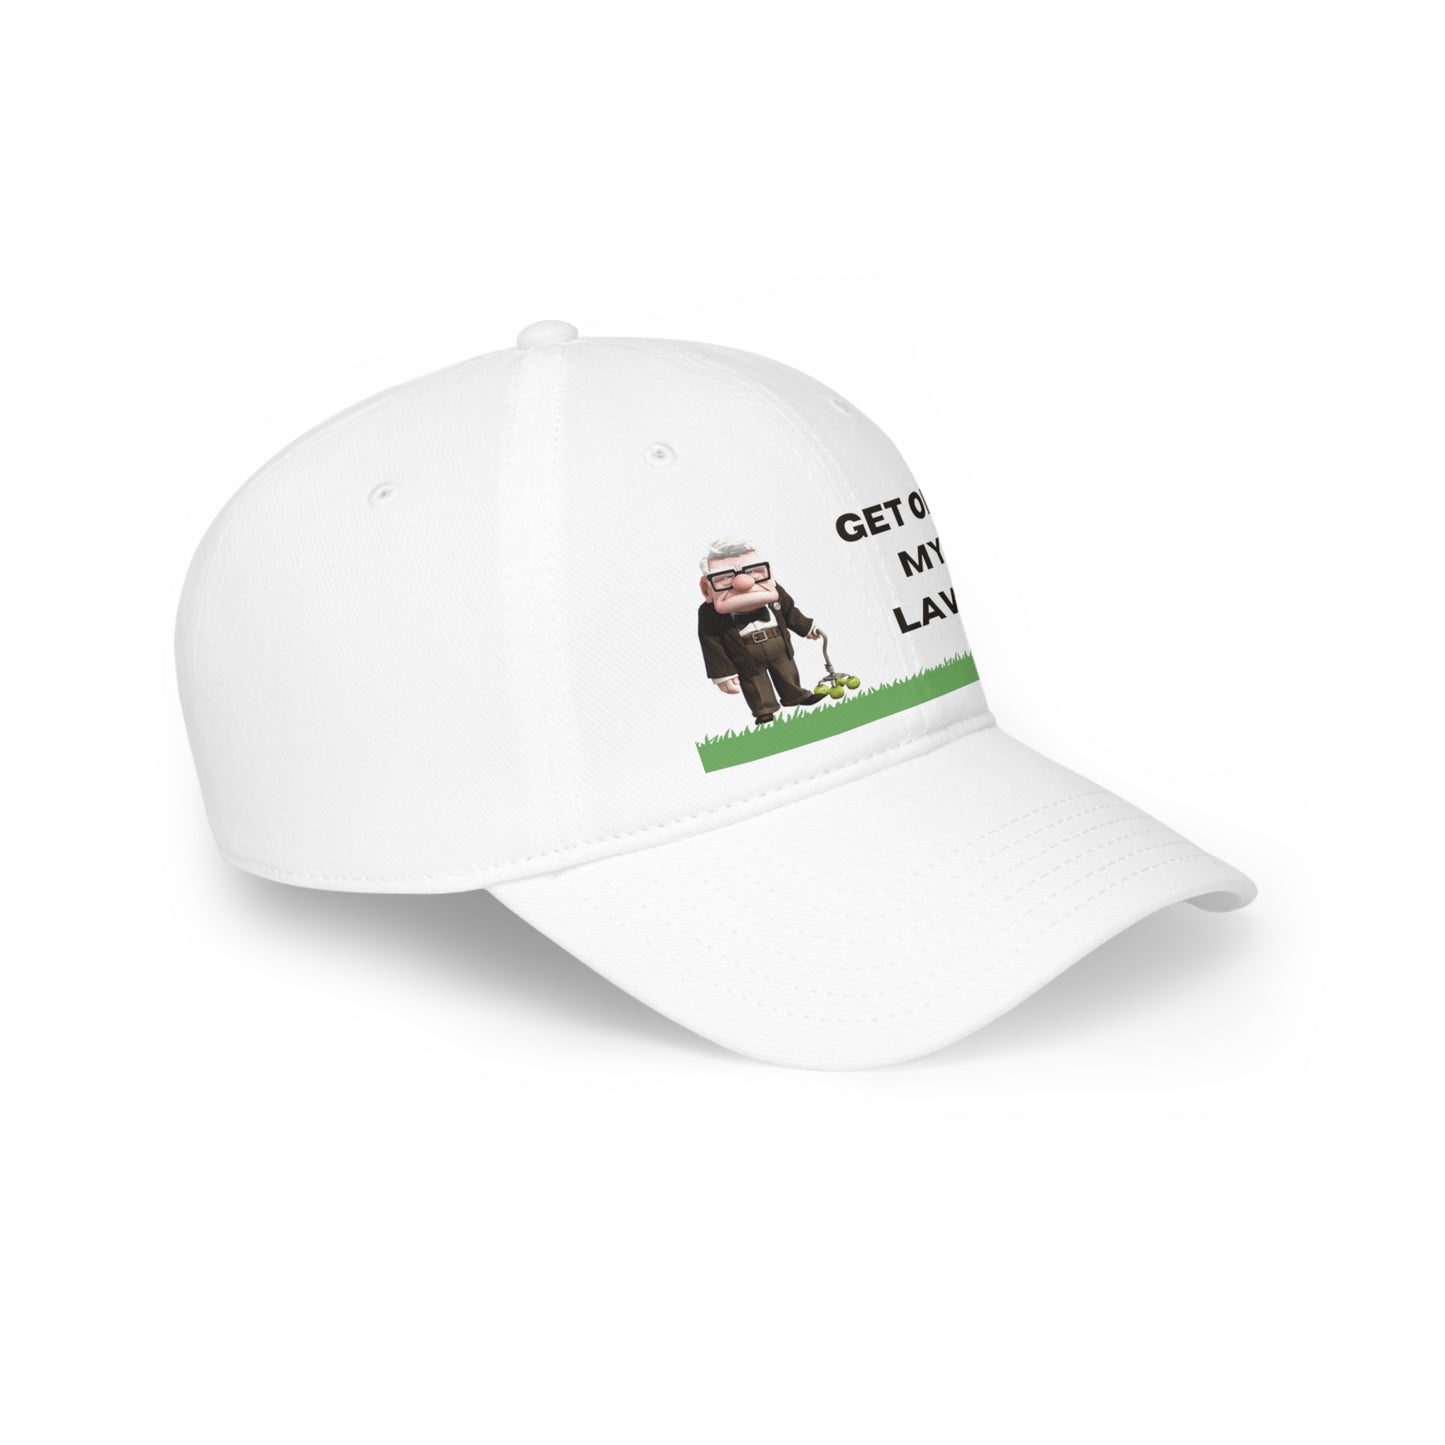 GET OFF My Lawn - One Of a Kind DTG Print -  Low Profile Baseball Cap